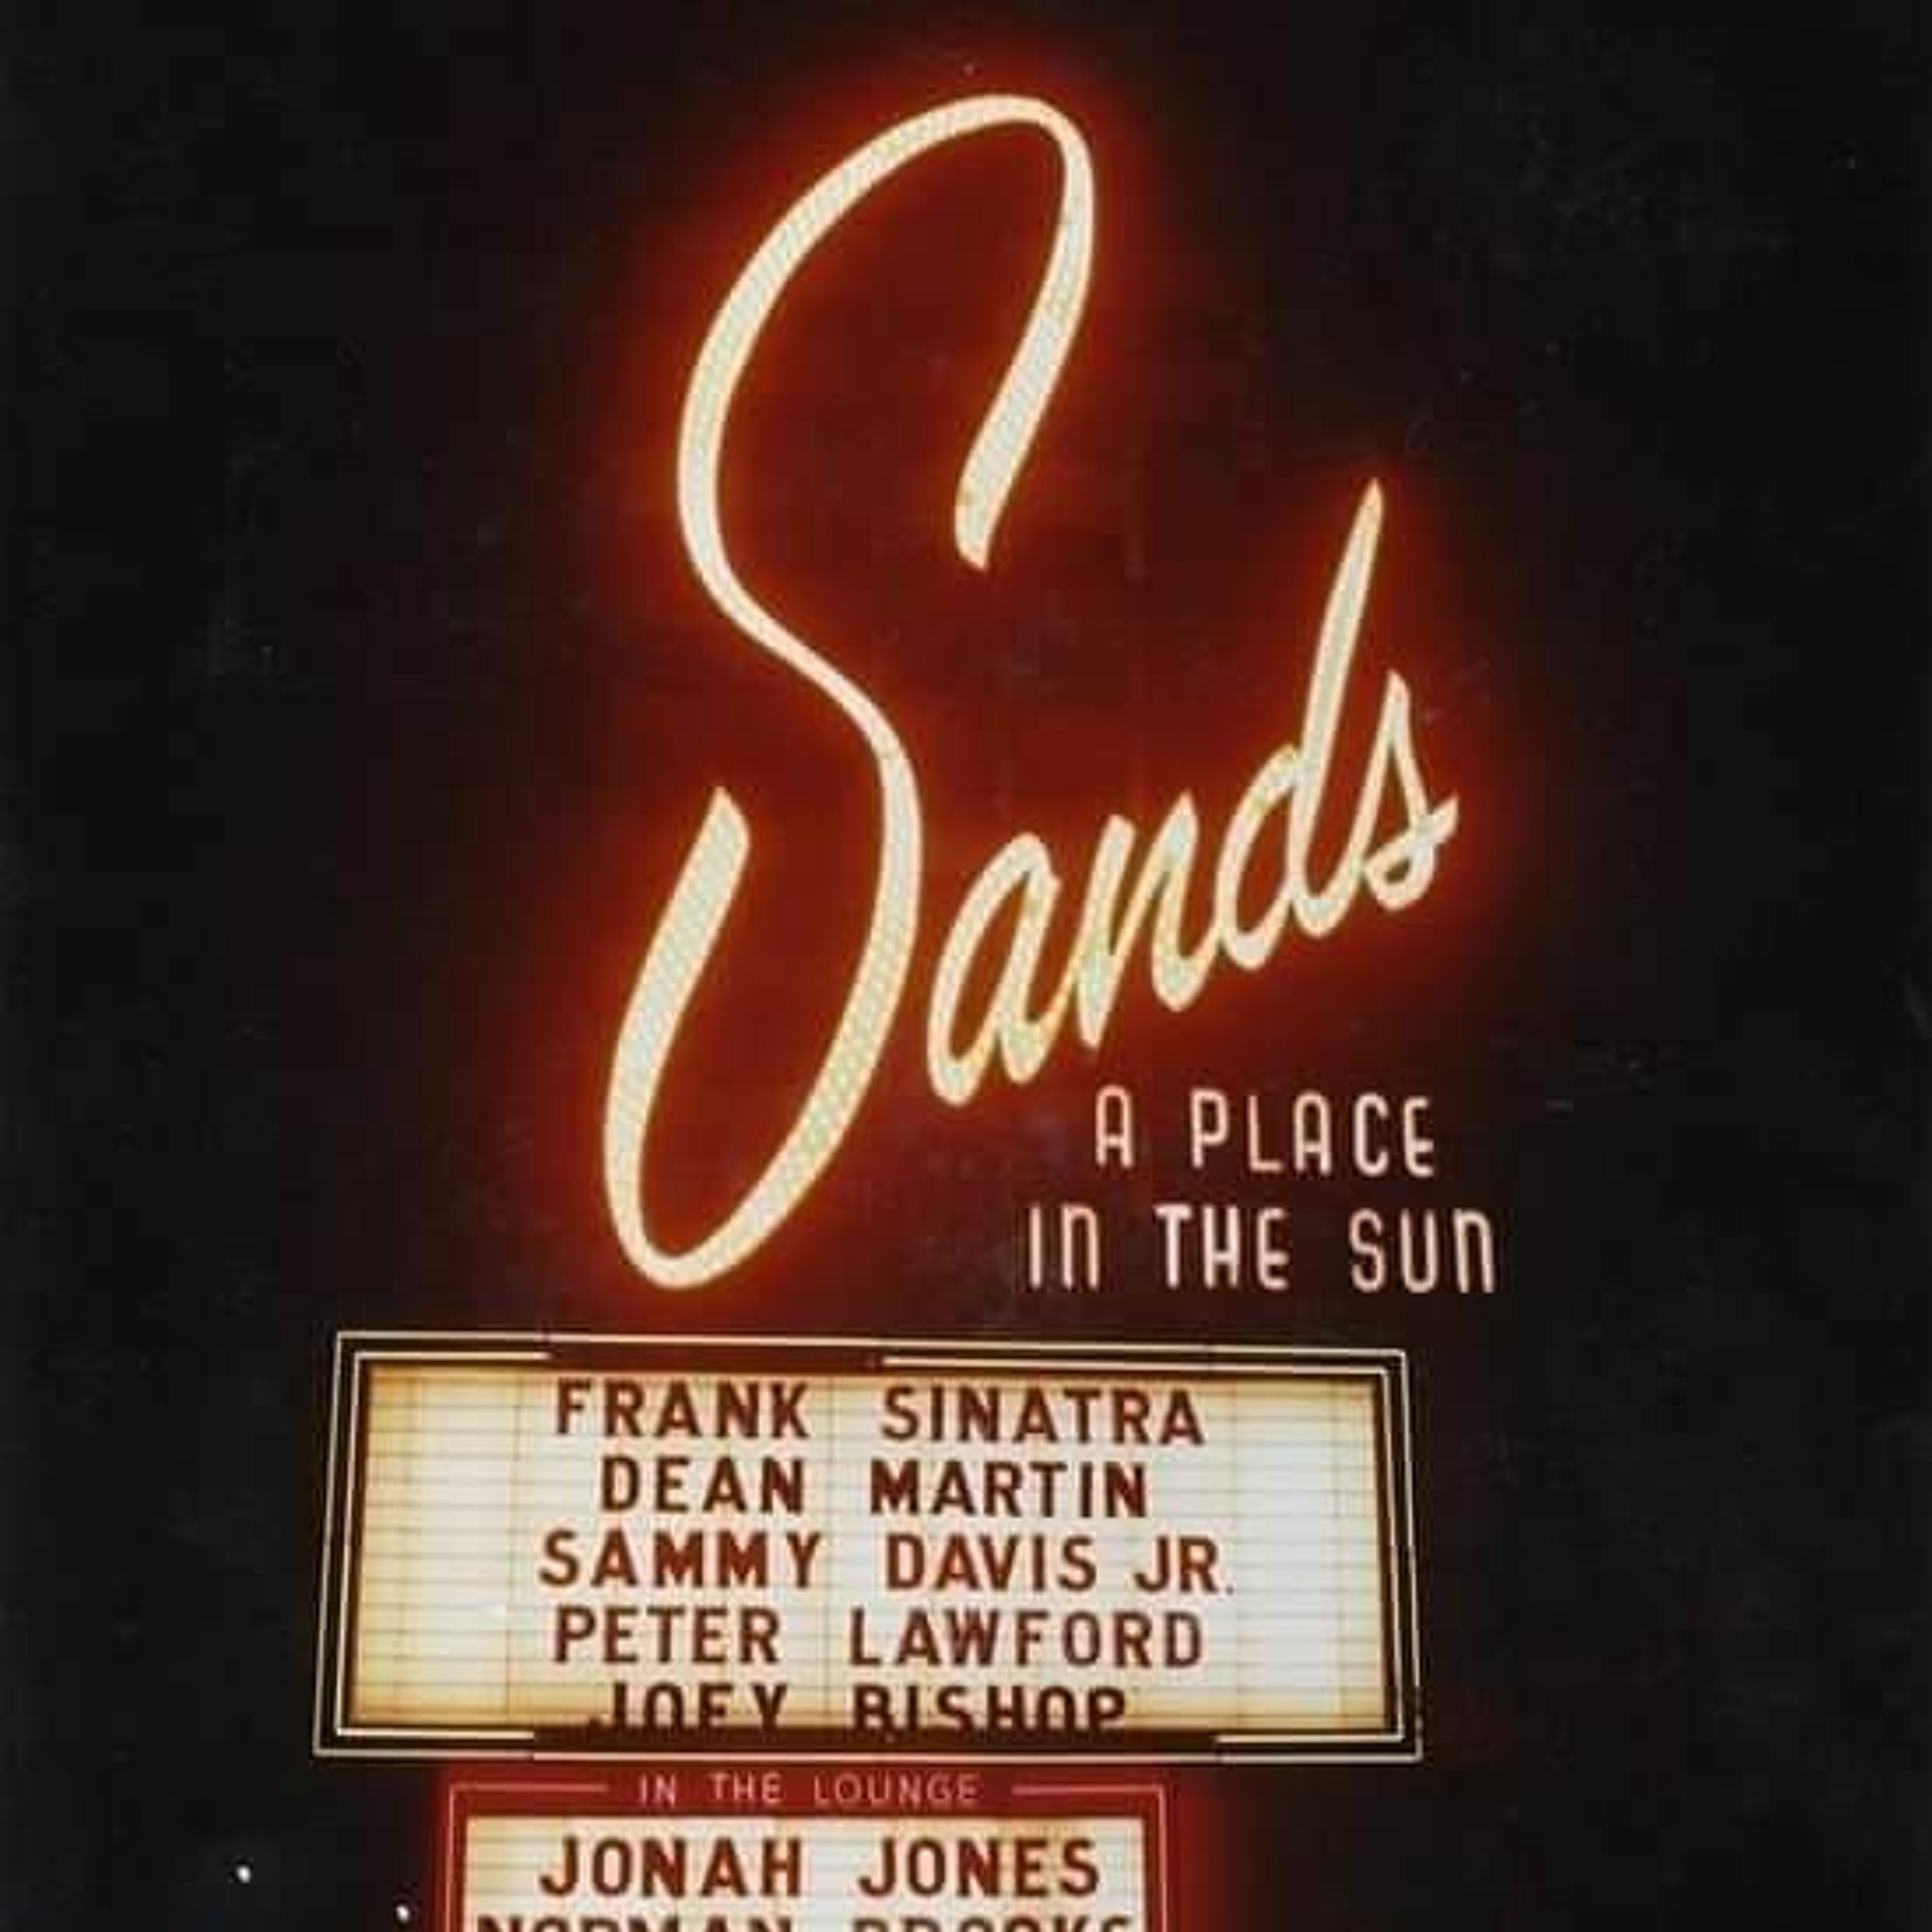 ”At the Sands: The Casino That Shaped Classic Las Vegas” - The Complete David Schwartz Interview